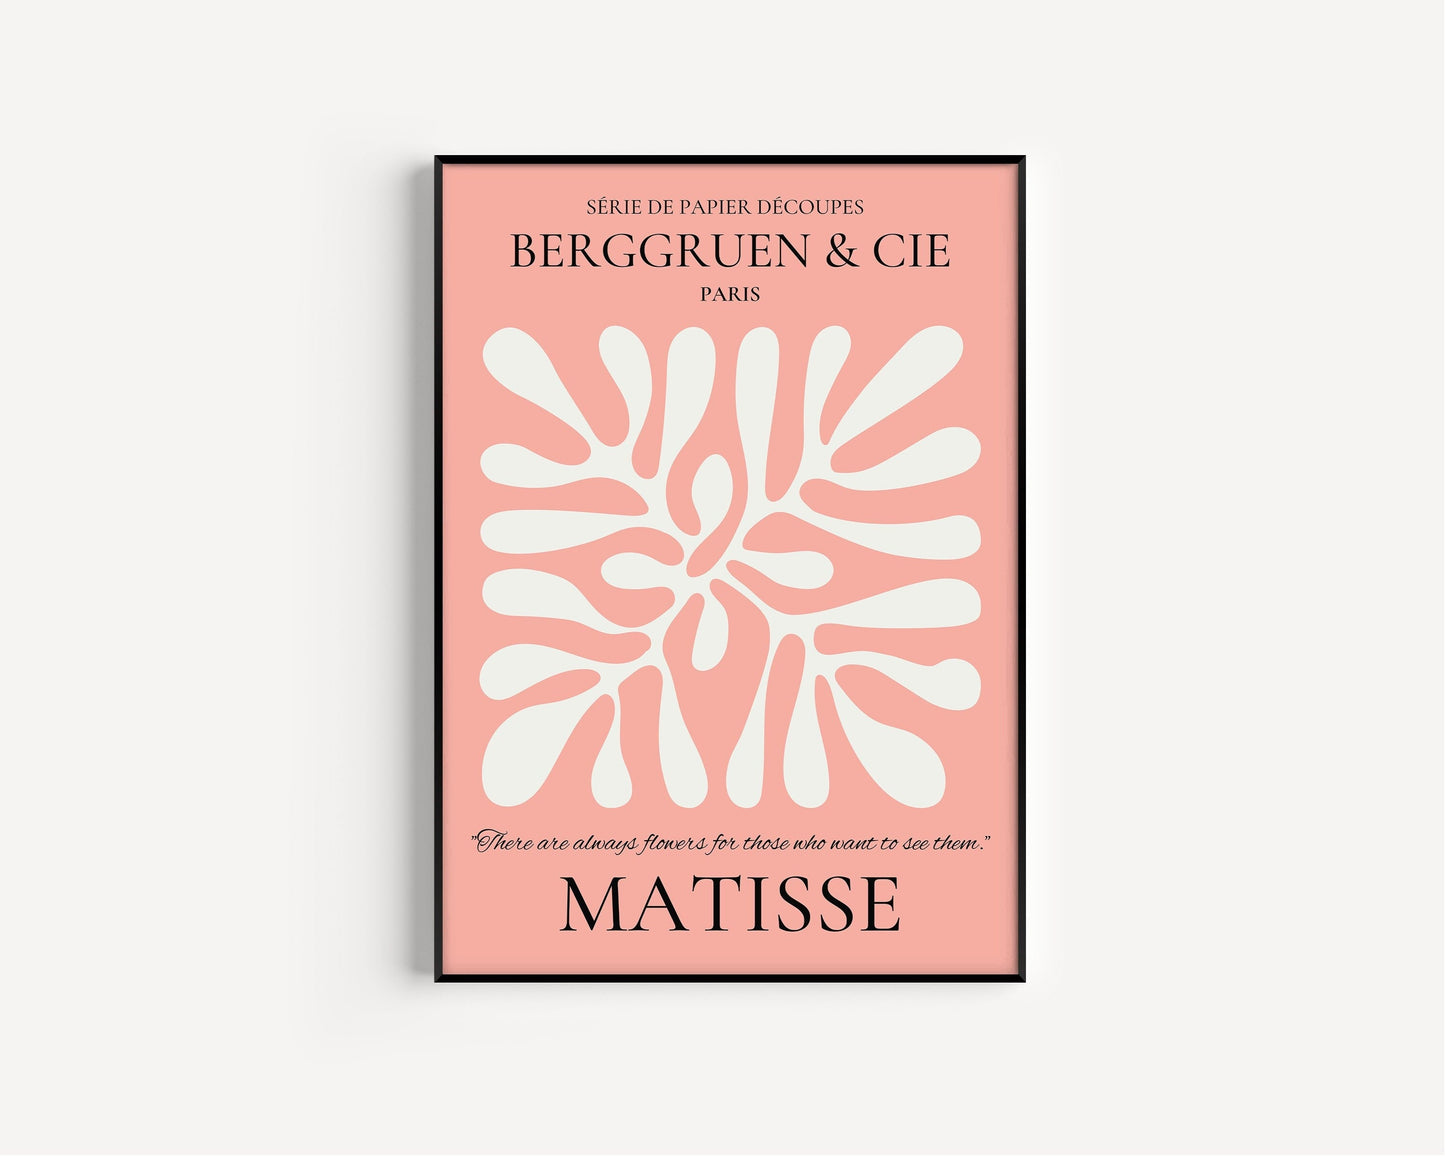 Framed Henri Matisse Leaf Poster Papier Decoupes Exhibition Museum Abstract Art Mid Century Modern Blush Pink Print Girl Ready to hang Decor